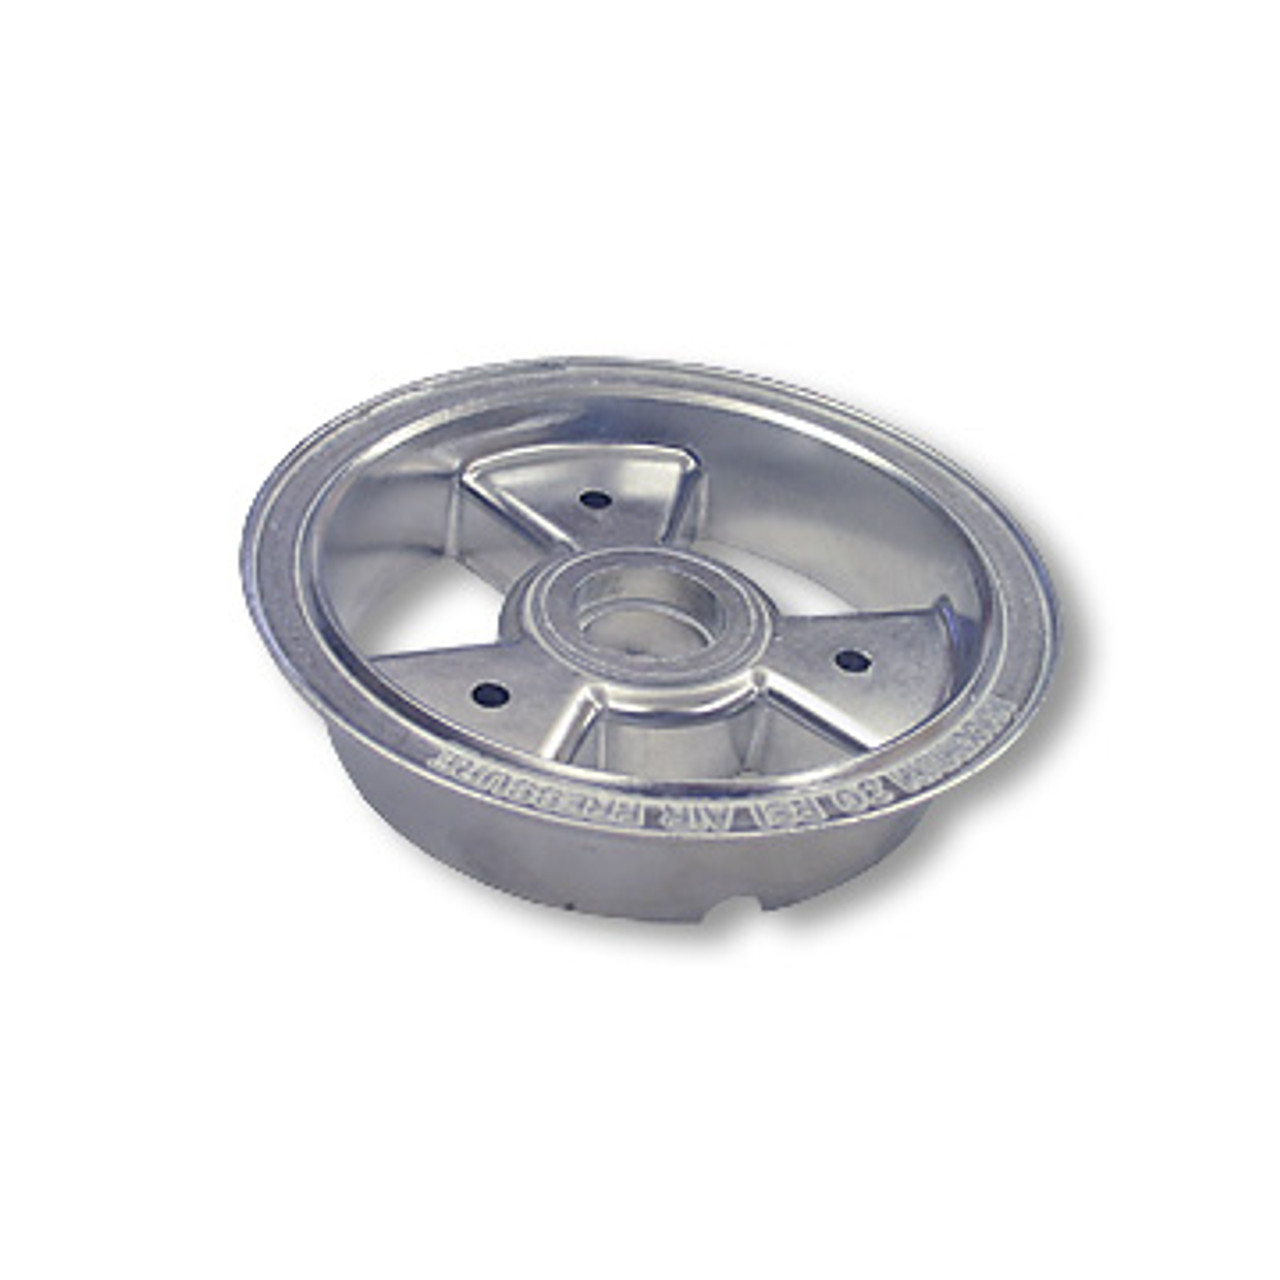 6" Aluminum Tri-Star Wheel - One Half Only, 1.5" Wide For Ball Bearing